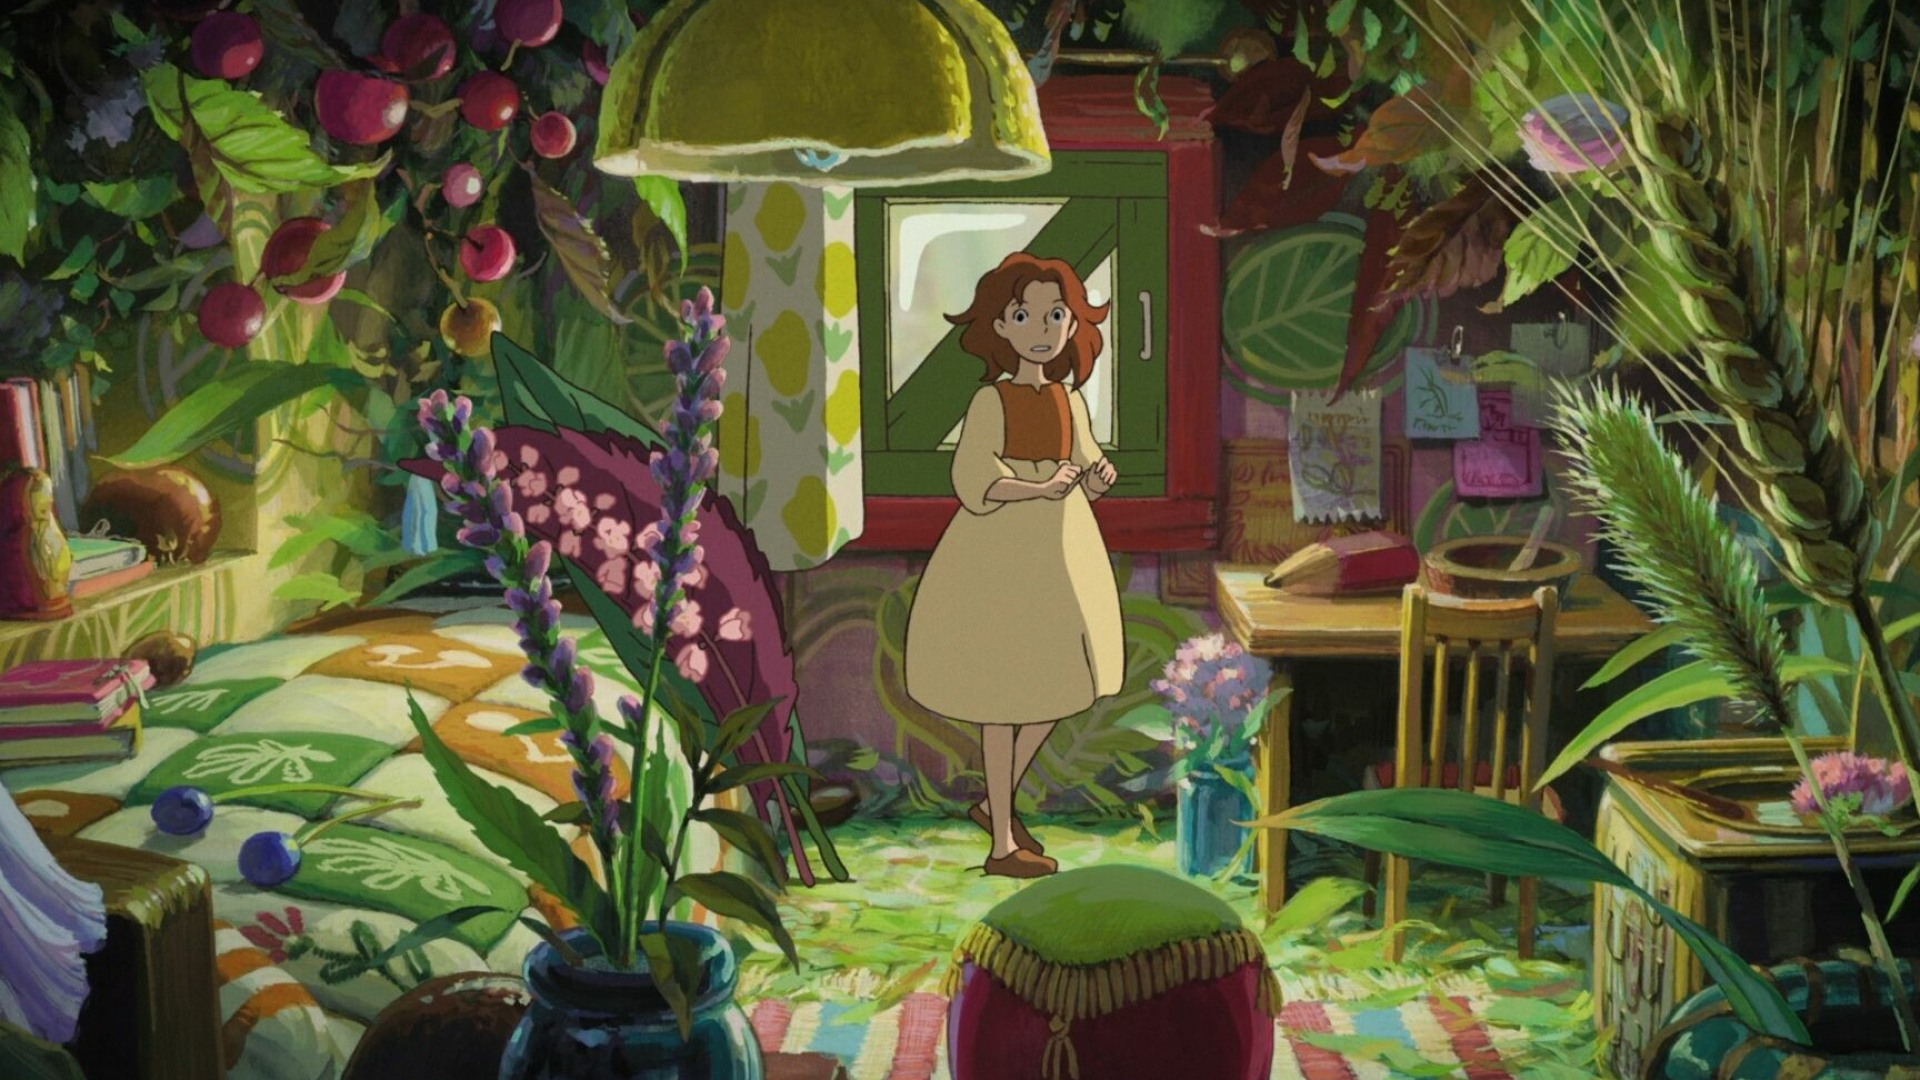 The Secret World of Arrietty: The Clock family, Four-inch-tall people who live anonymously in another family's residence, borrowing simple items to make their home. 1920x1080 Full HD Wallpaper.